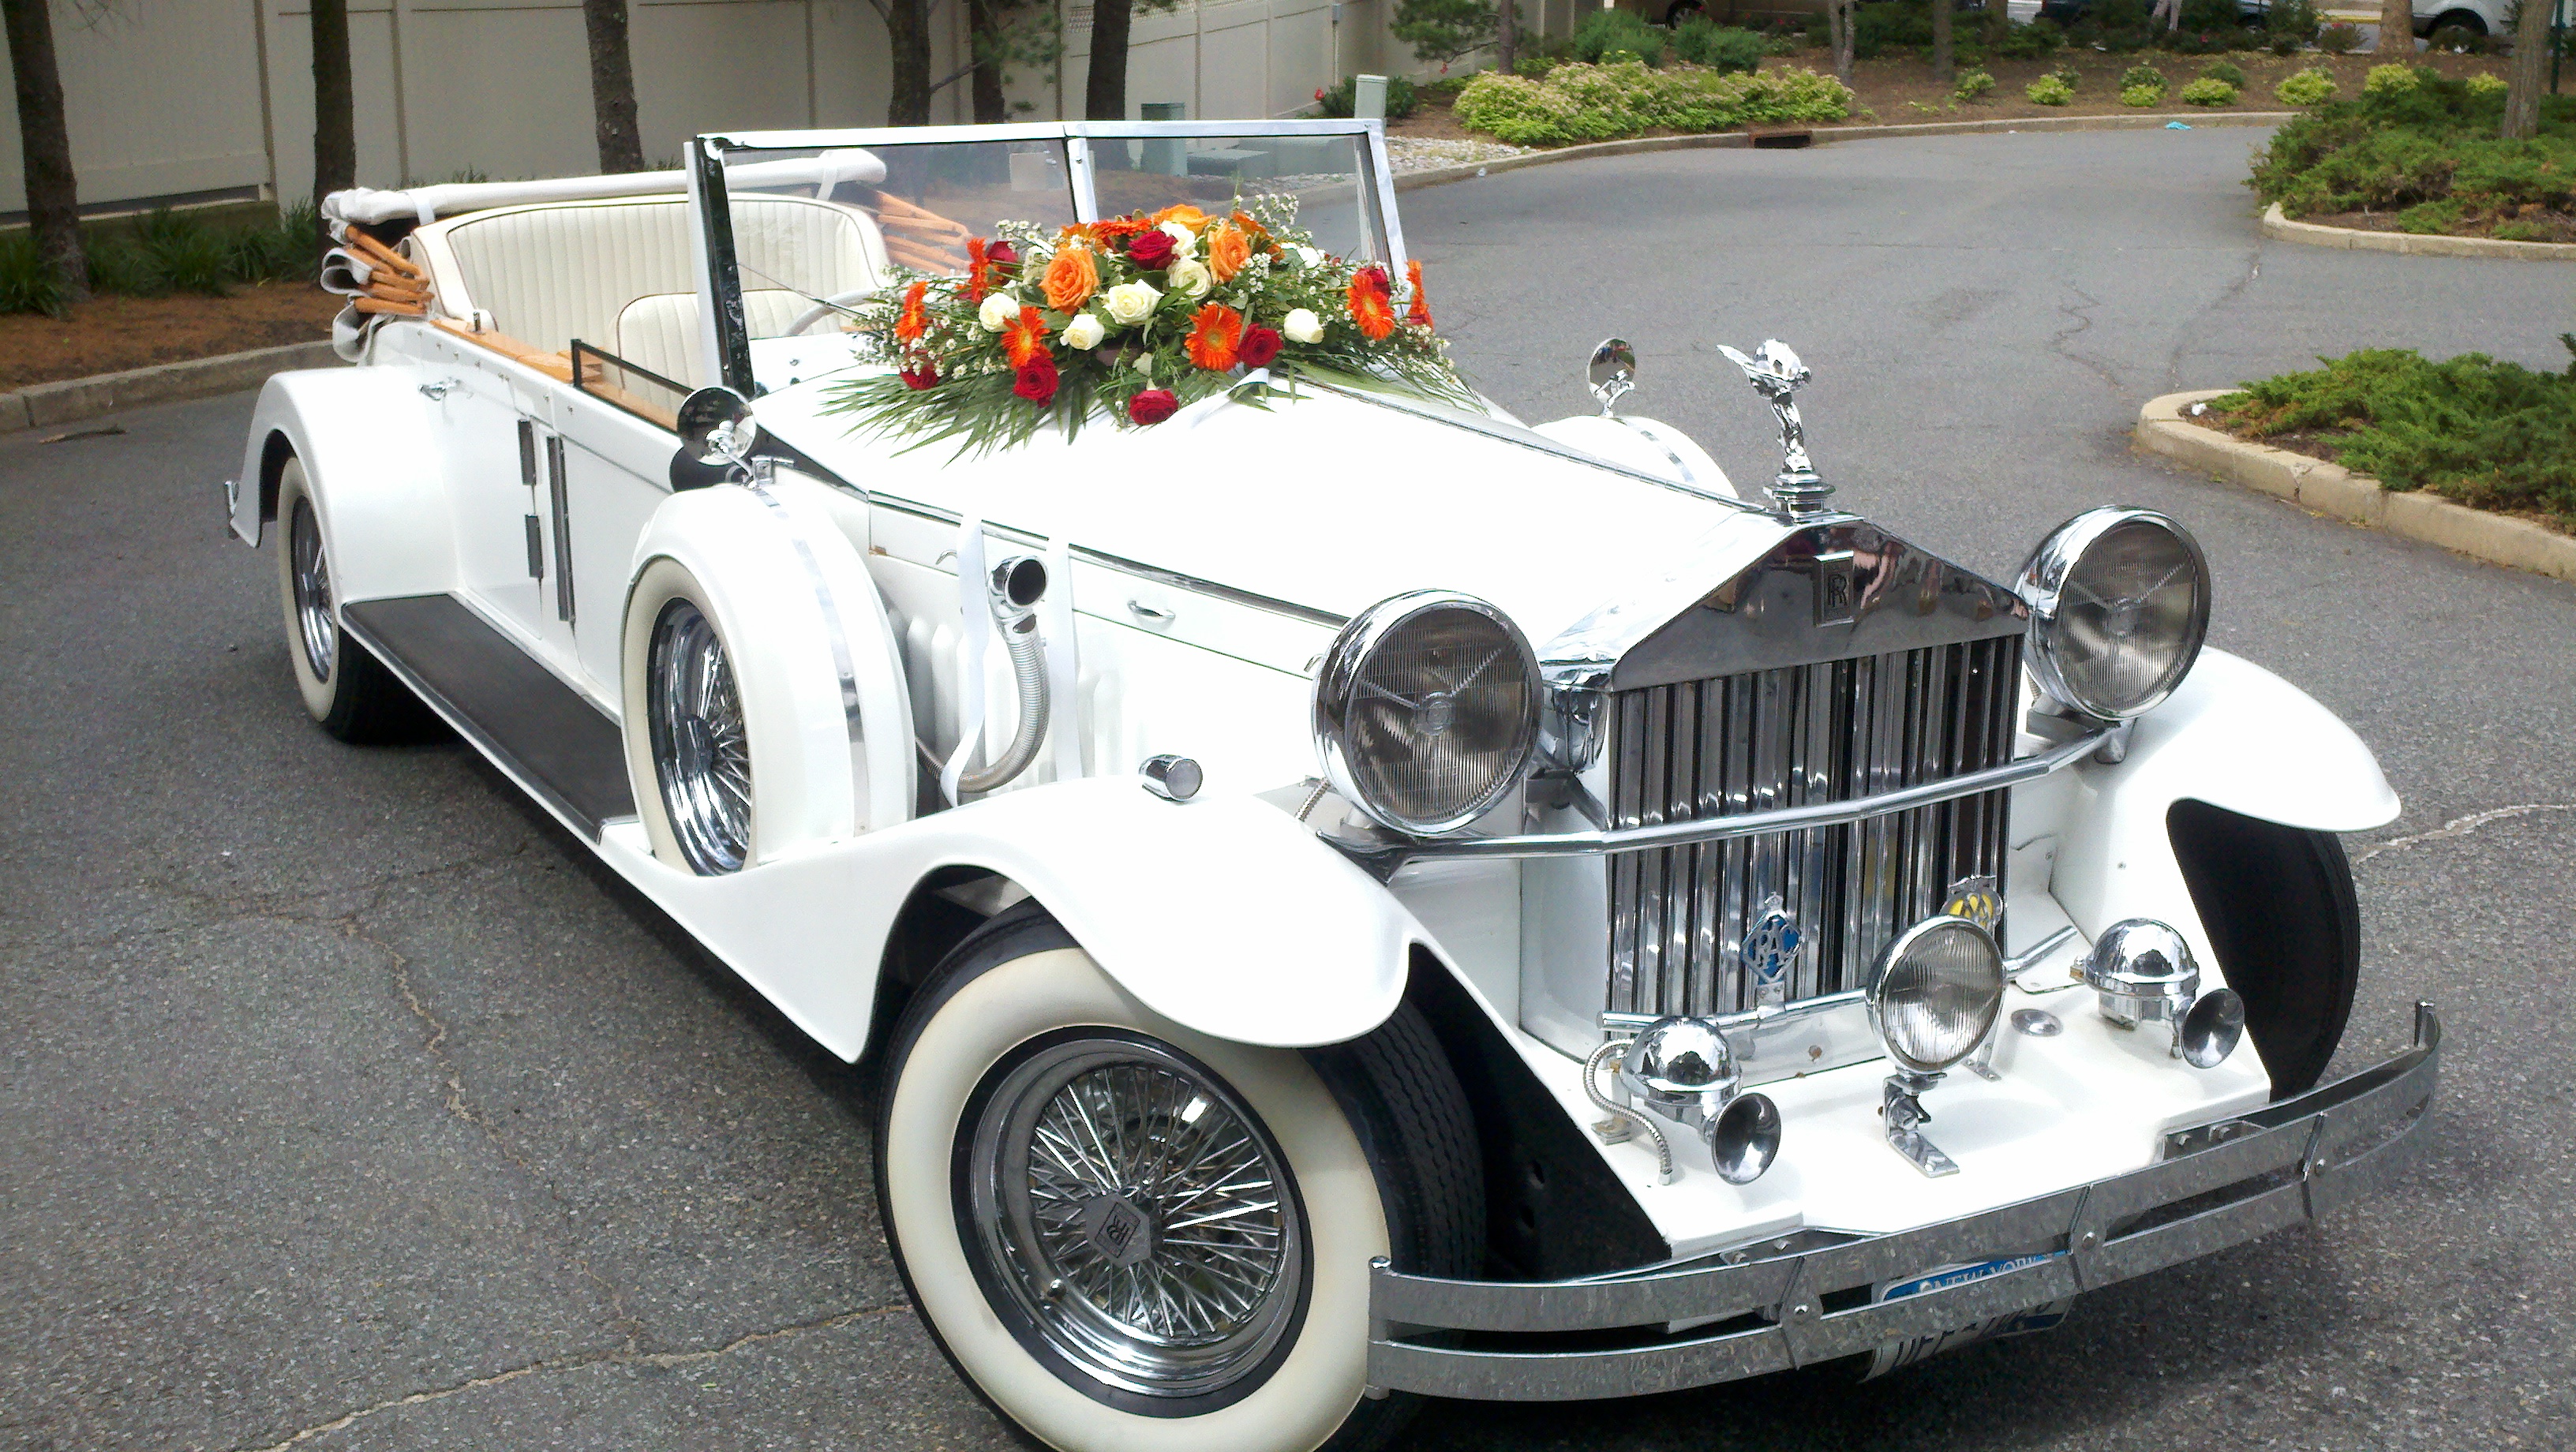 1930 Touring Rolls Royce Convertible | Party Bus and Limo Rental , Prom ...